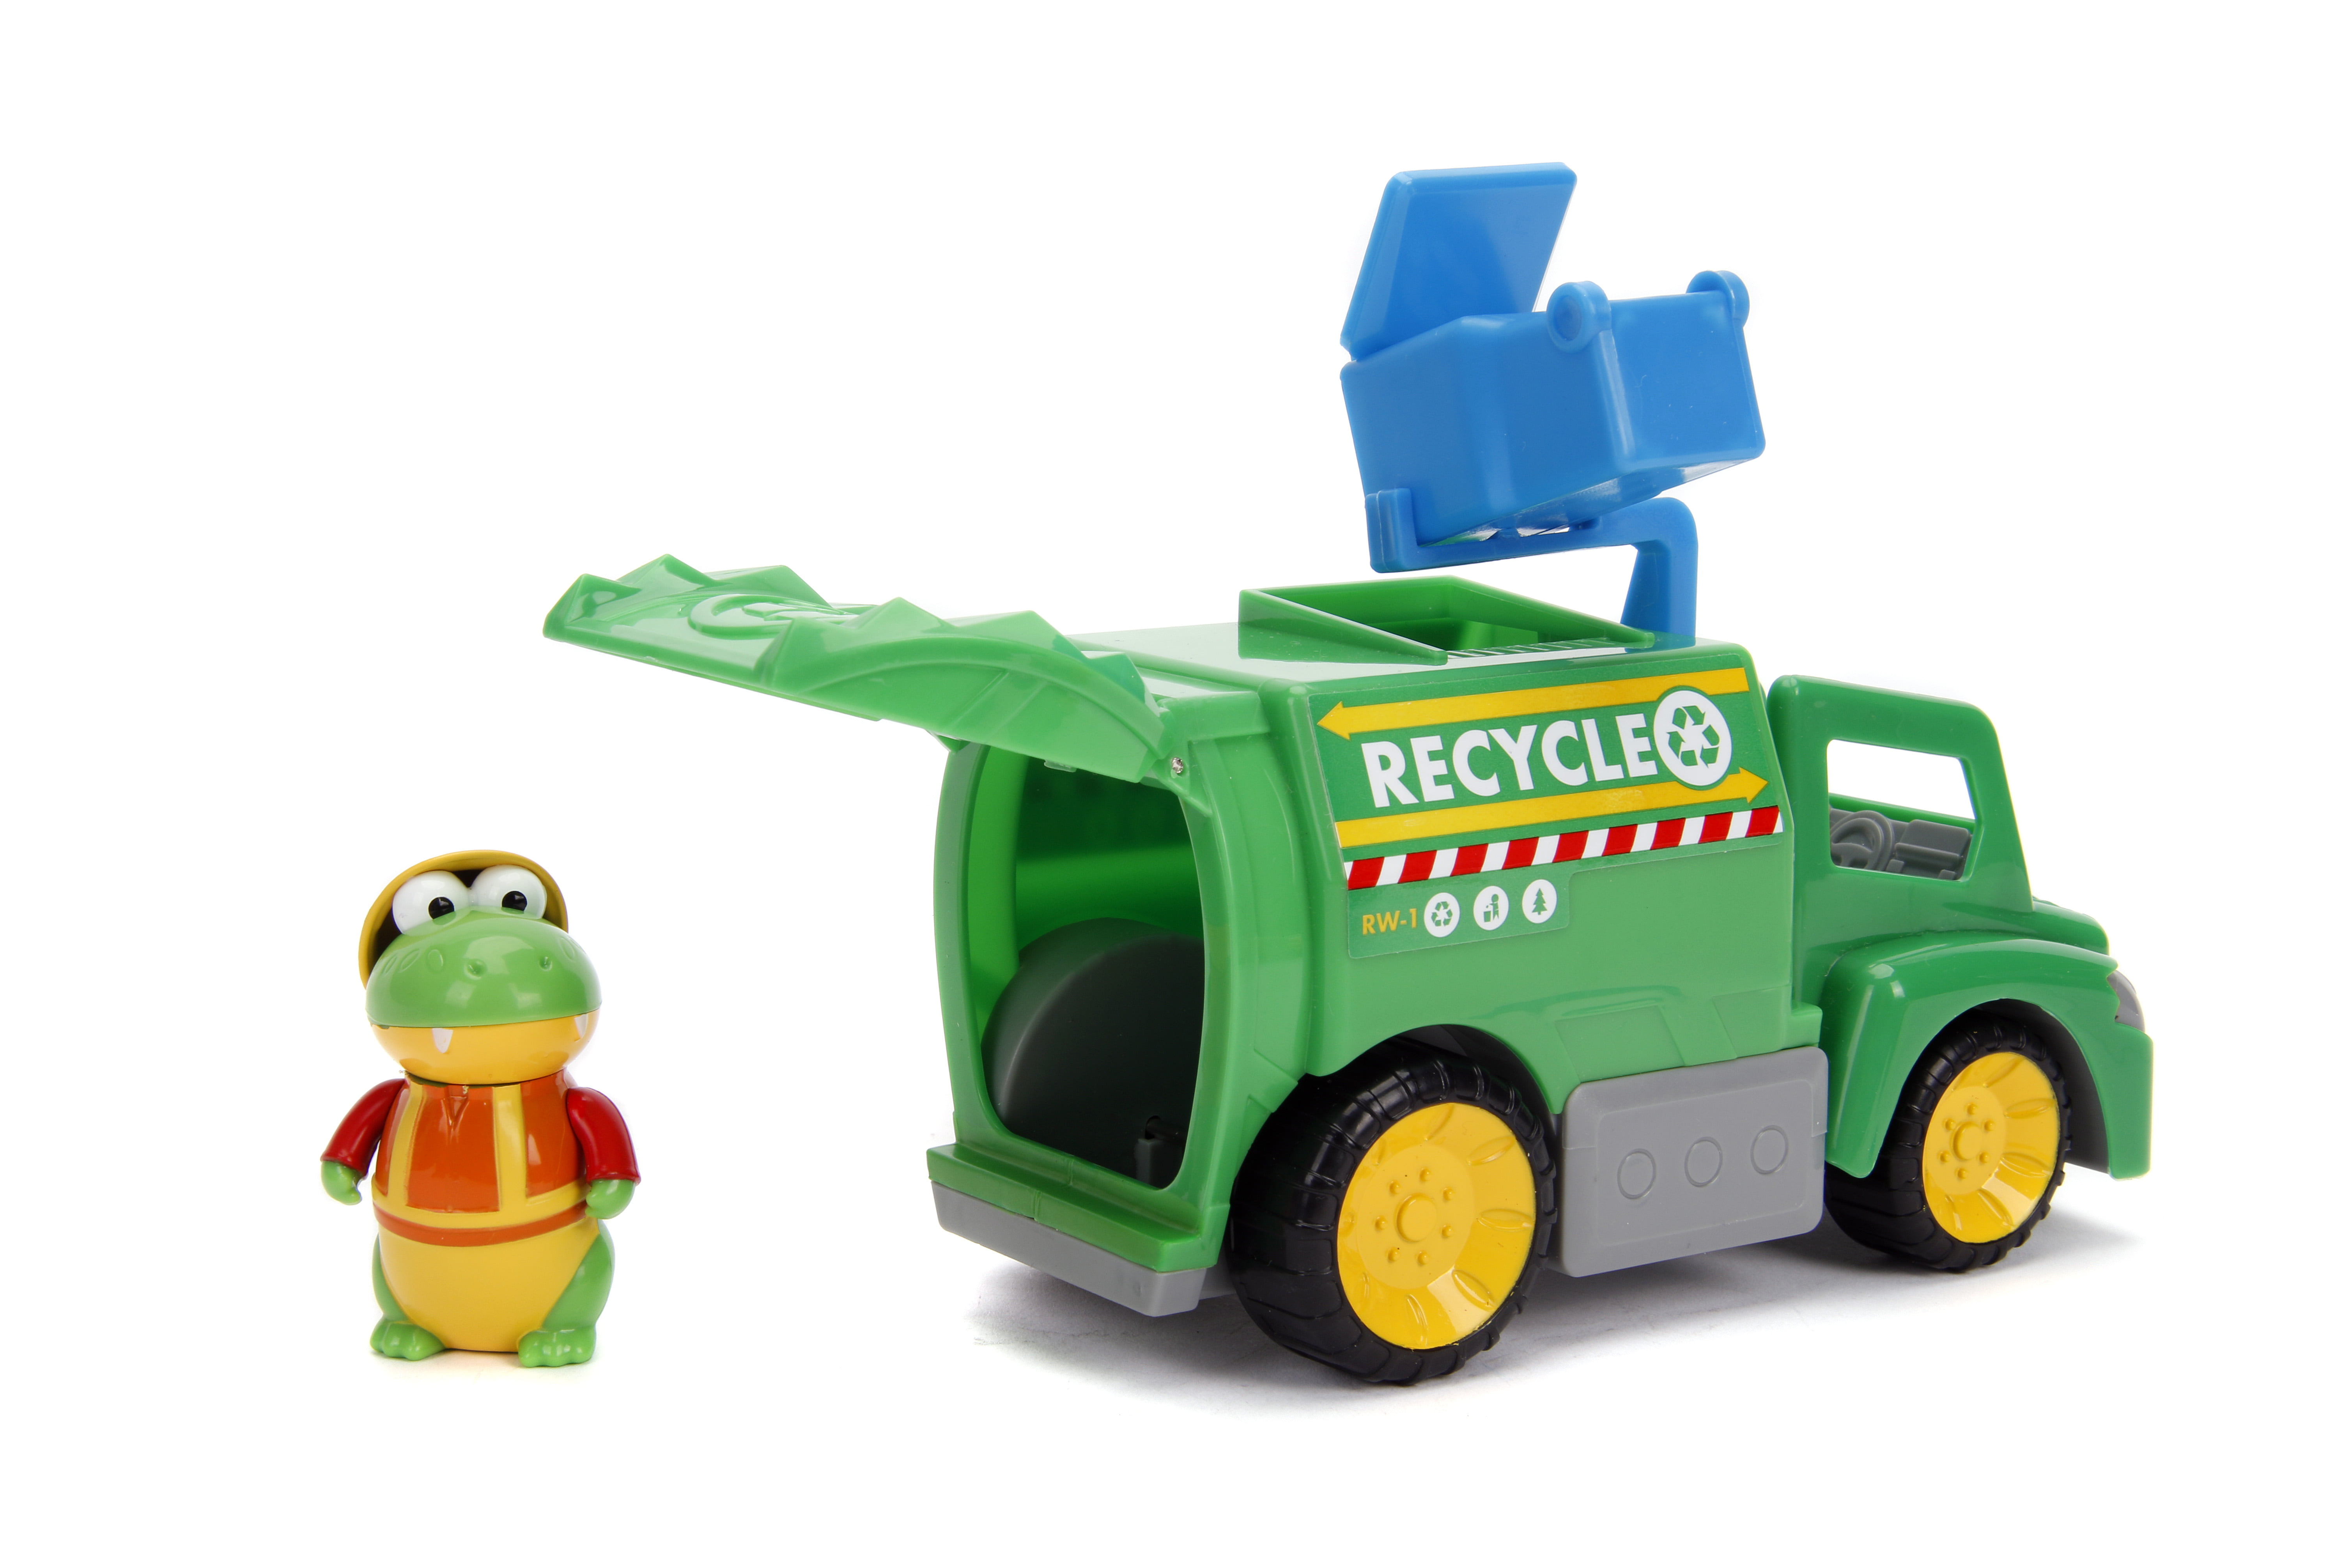 .com: Smash Crashers 3-Pack, Turnpike Ted, Rusty Rigs & Willy Waste,  Multi-Color : Toys & Games